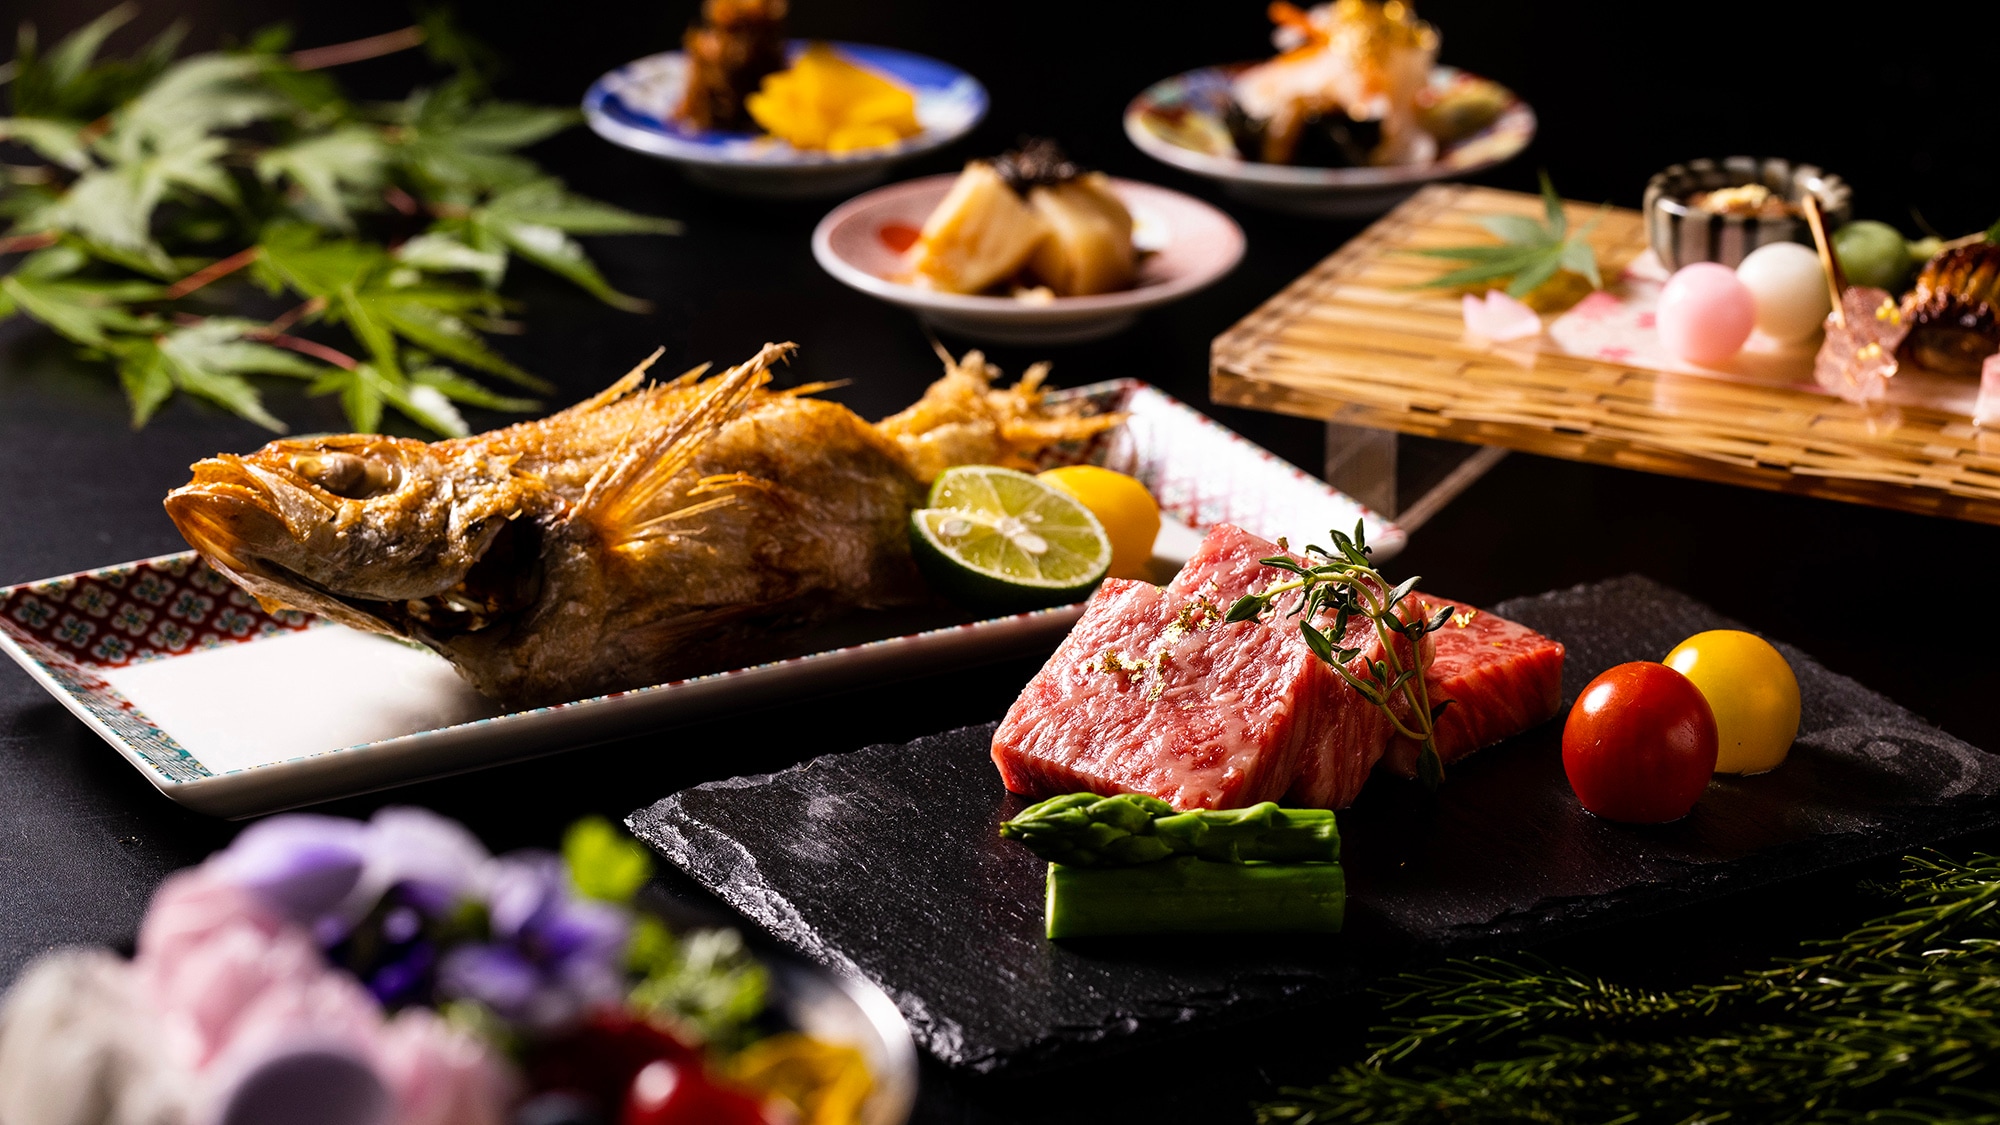 White-fleshed fatty tuna "Nodoguro" and legendary brand beef "Noto Beef". A luxurious kaiseki meal where you can enjoy both high-quality ingredients from Ishikawa.